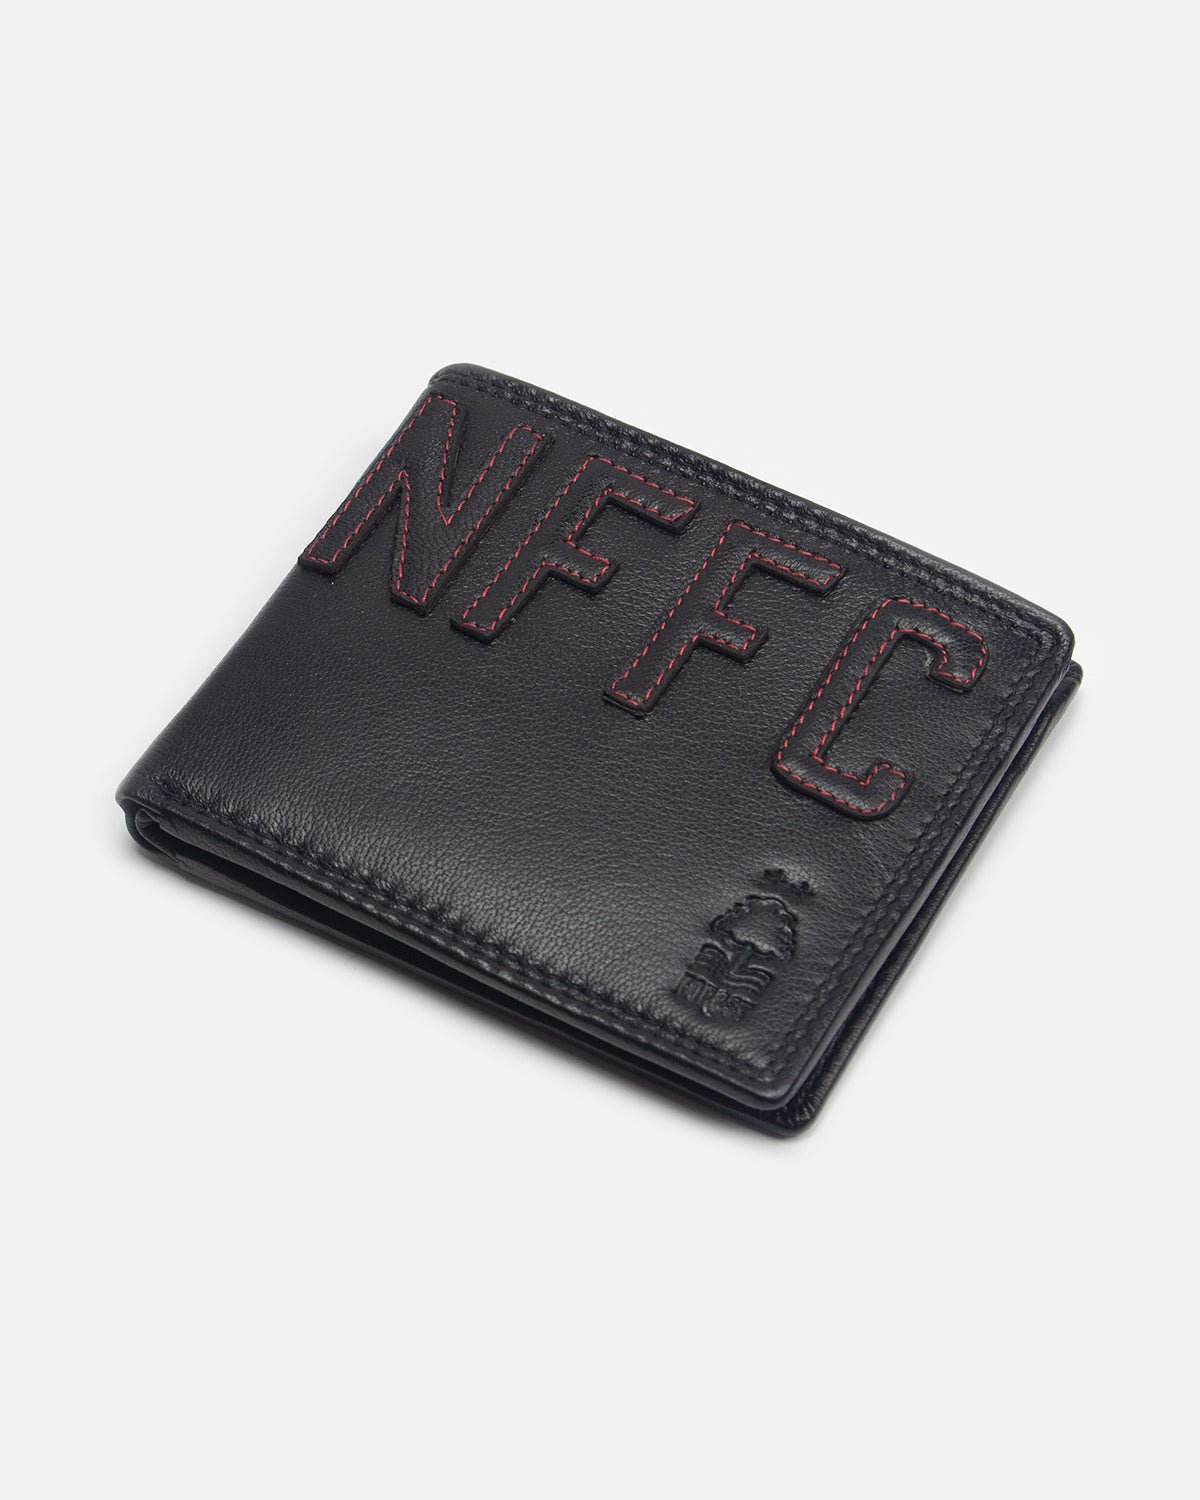 NFFC Text Wallet - Nottingham Forest FC